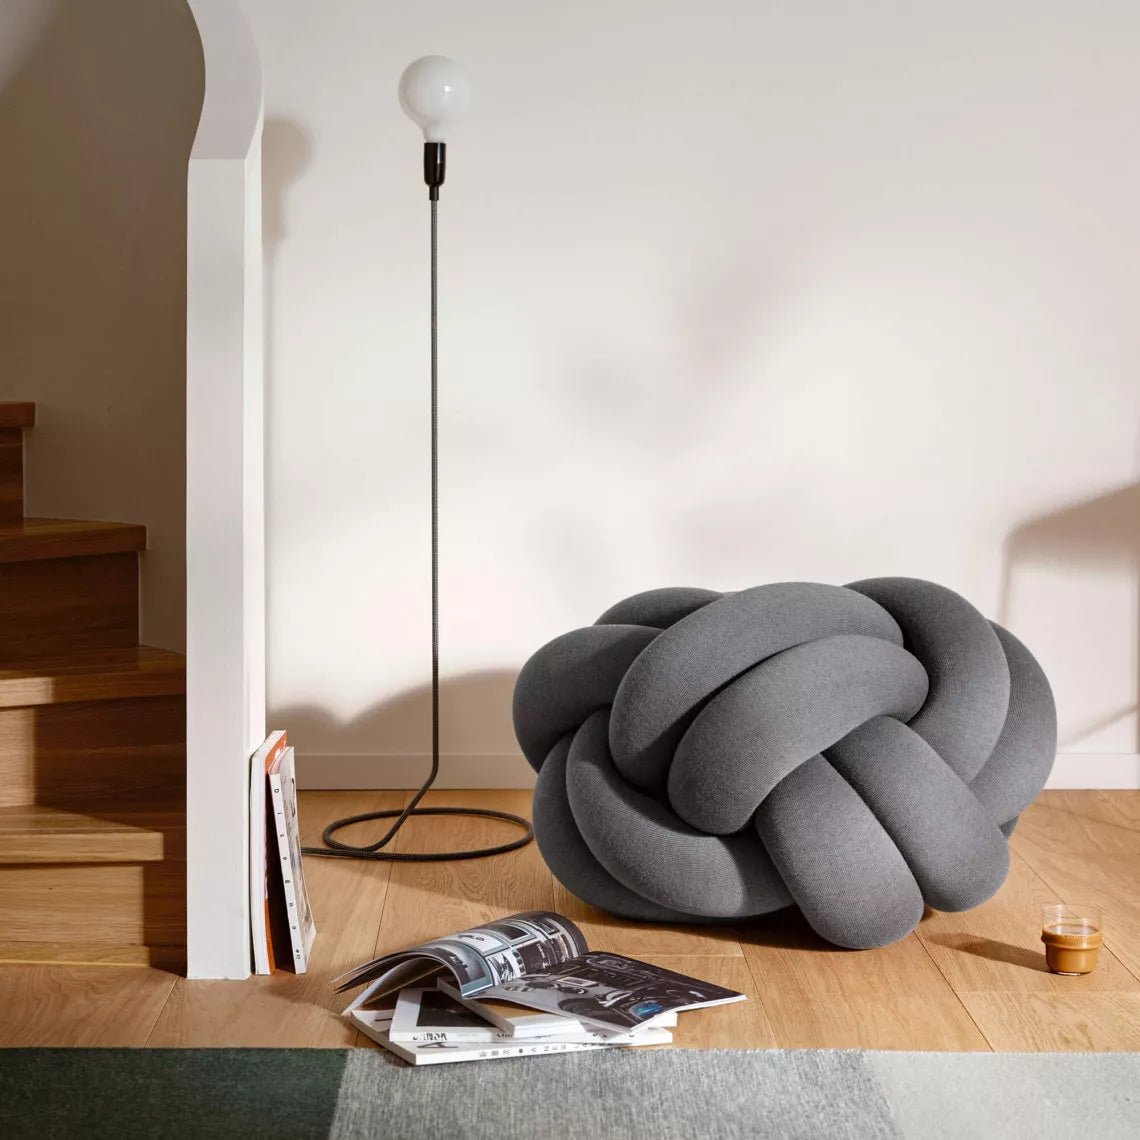 Knot Cusion XL - Knot seat cushion Seat cushion by Design House Stockholm